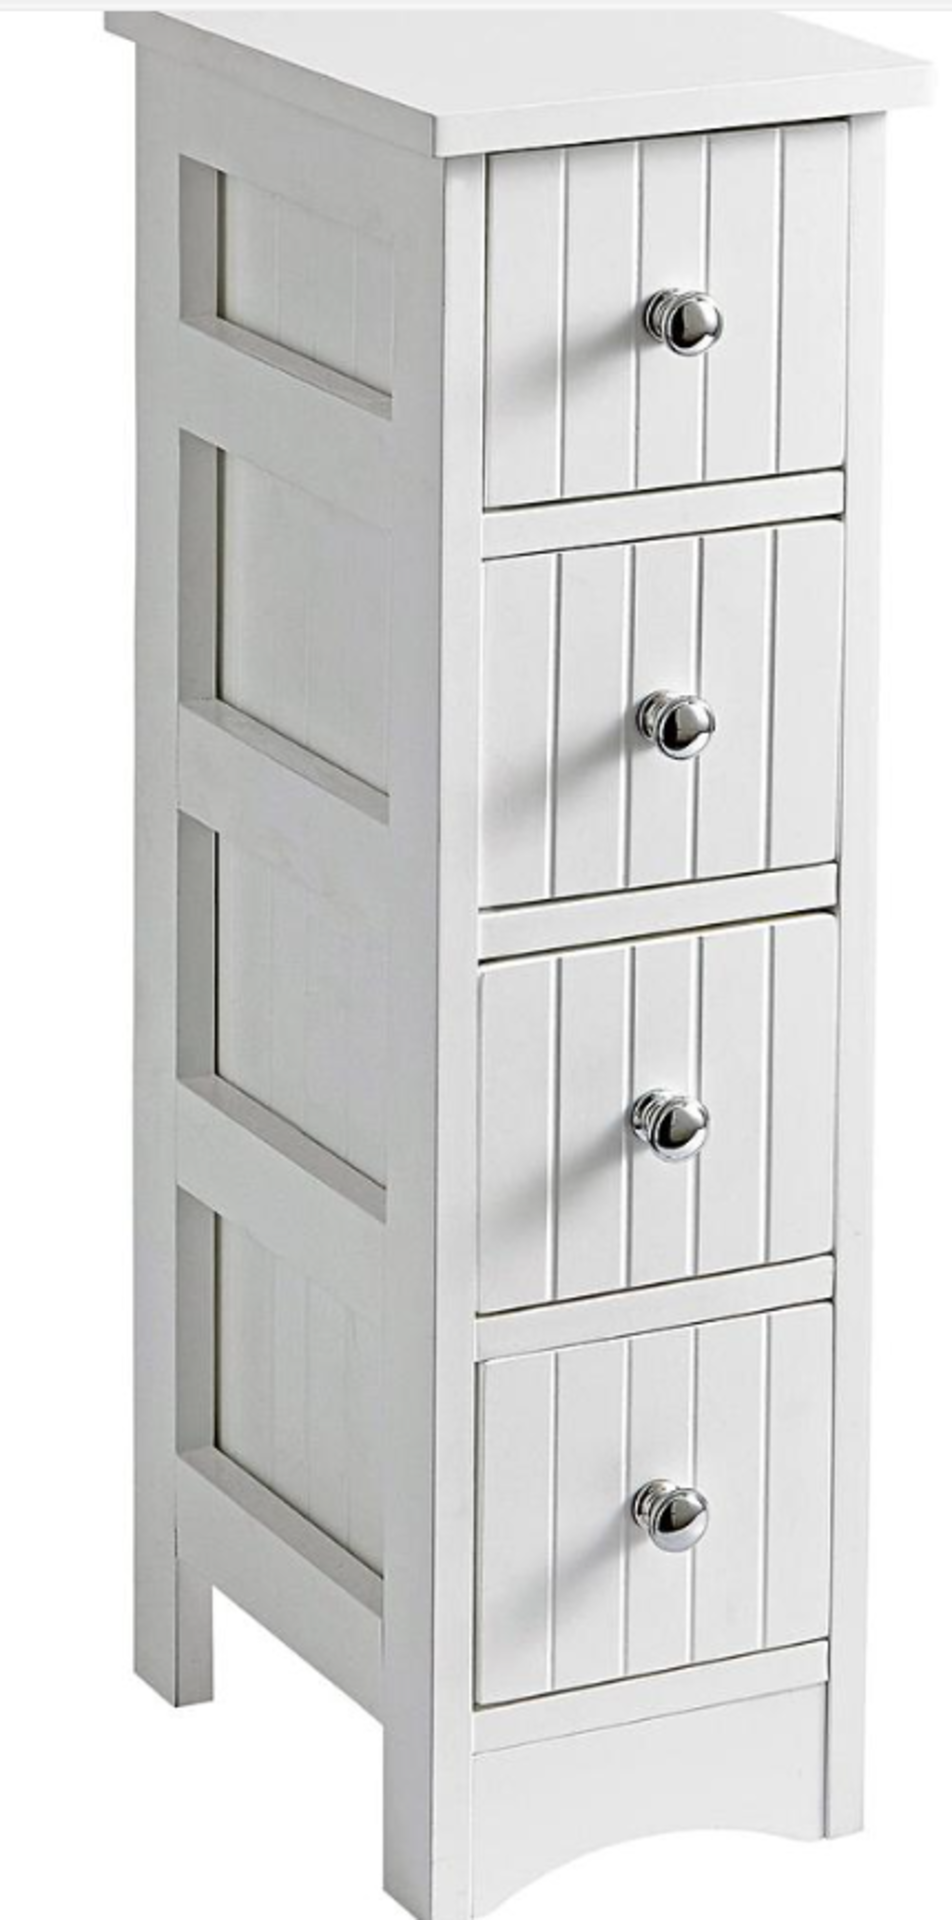 New England 4-Drawer Unit. - ER22. This cleverly designed slimline 4-drawer unit is ideal for neatly